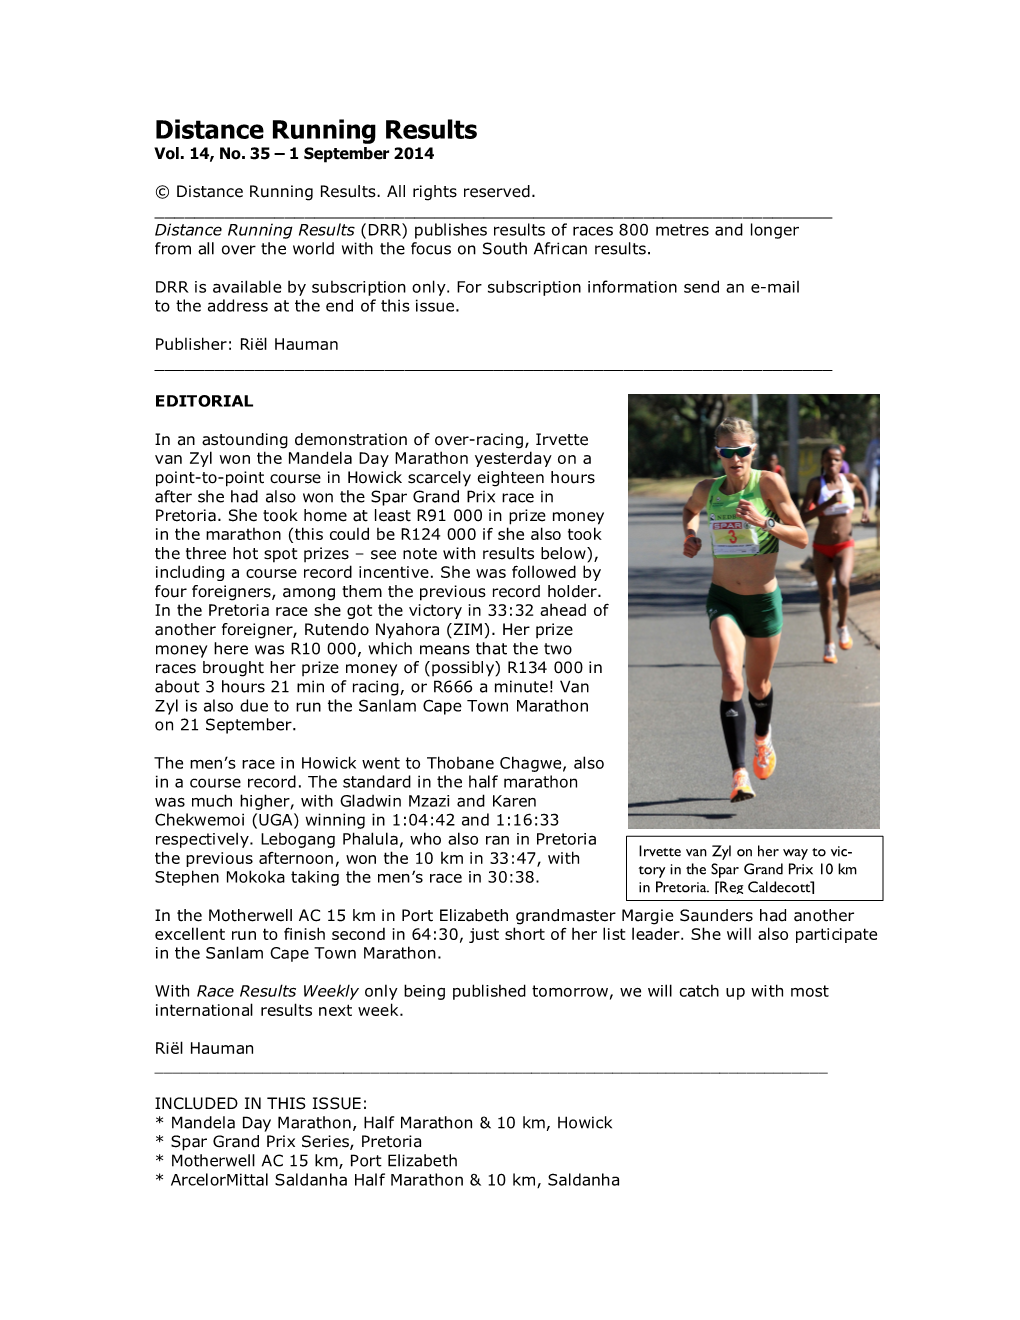 Distance Running Results Vol